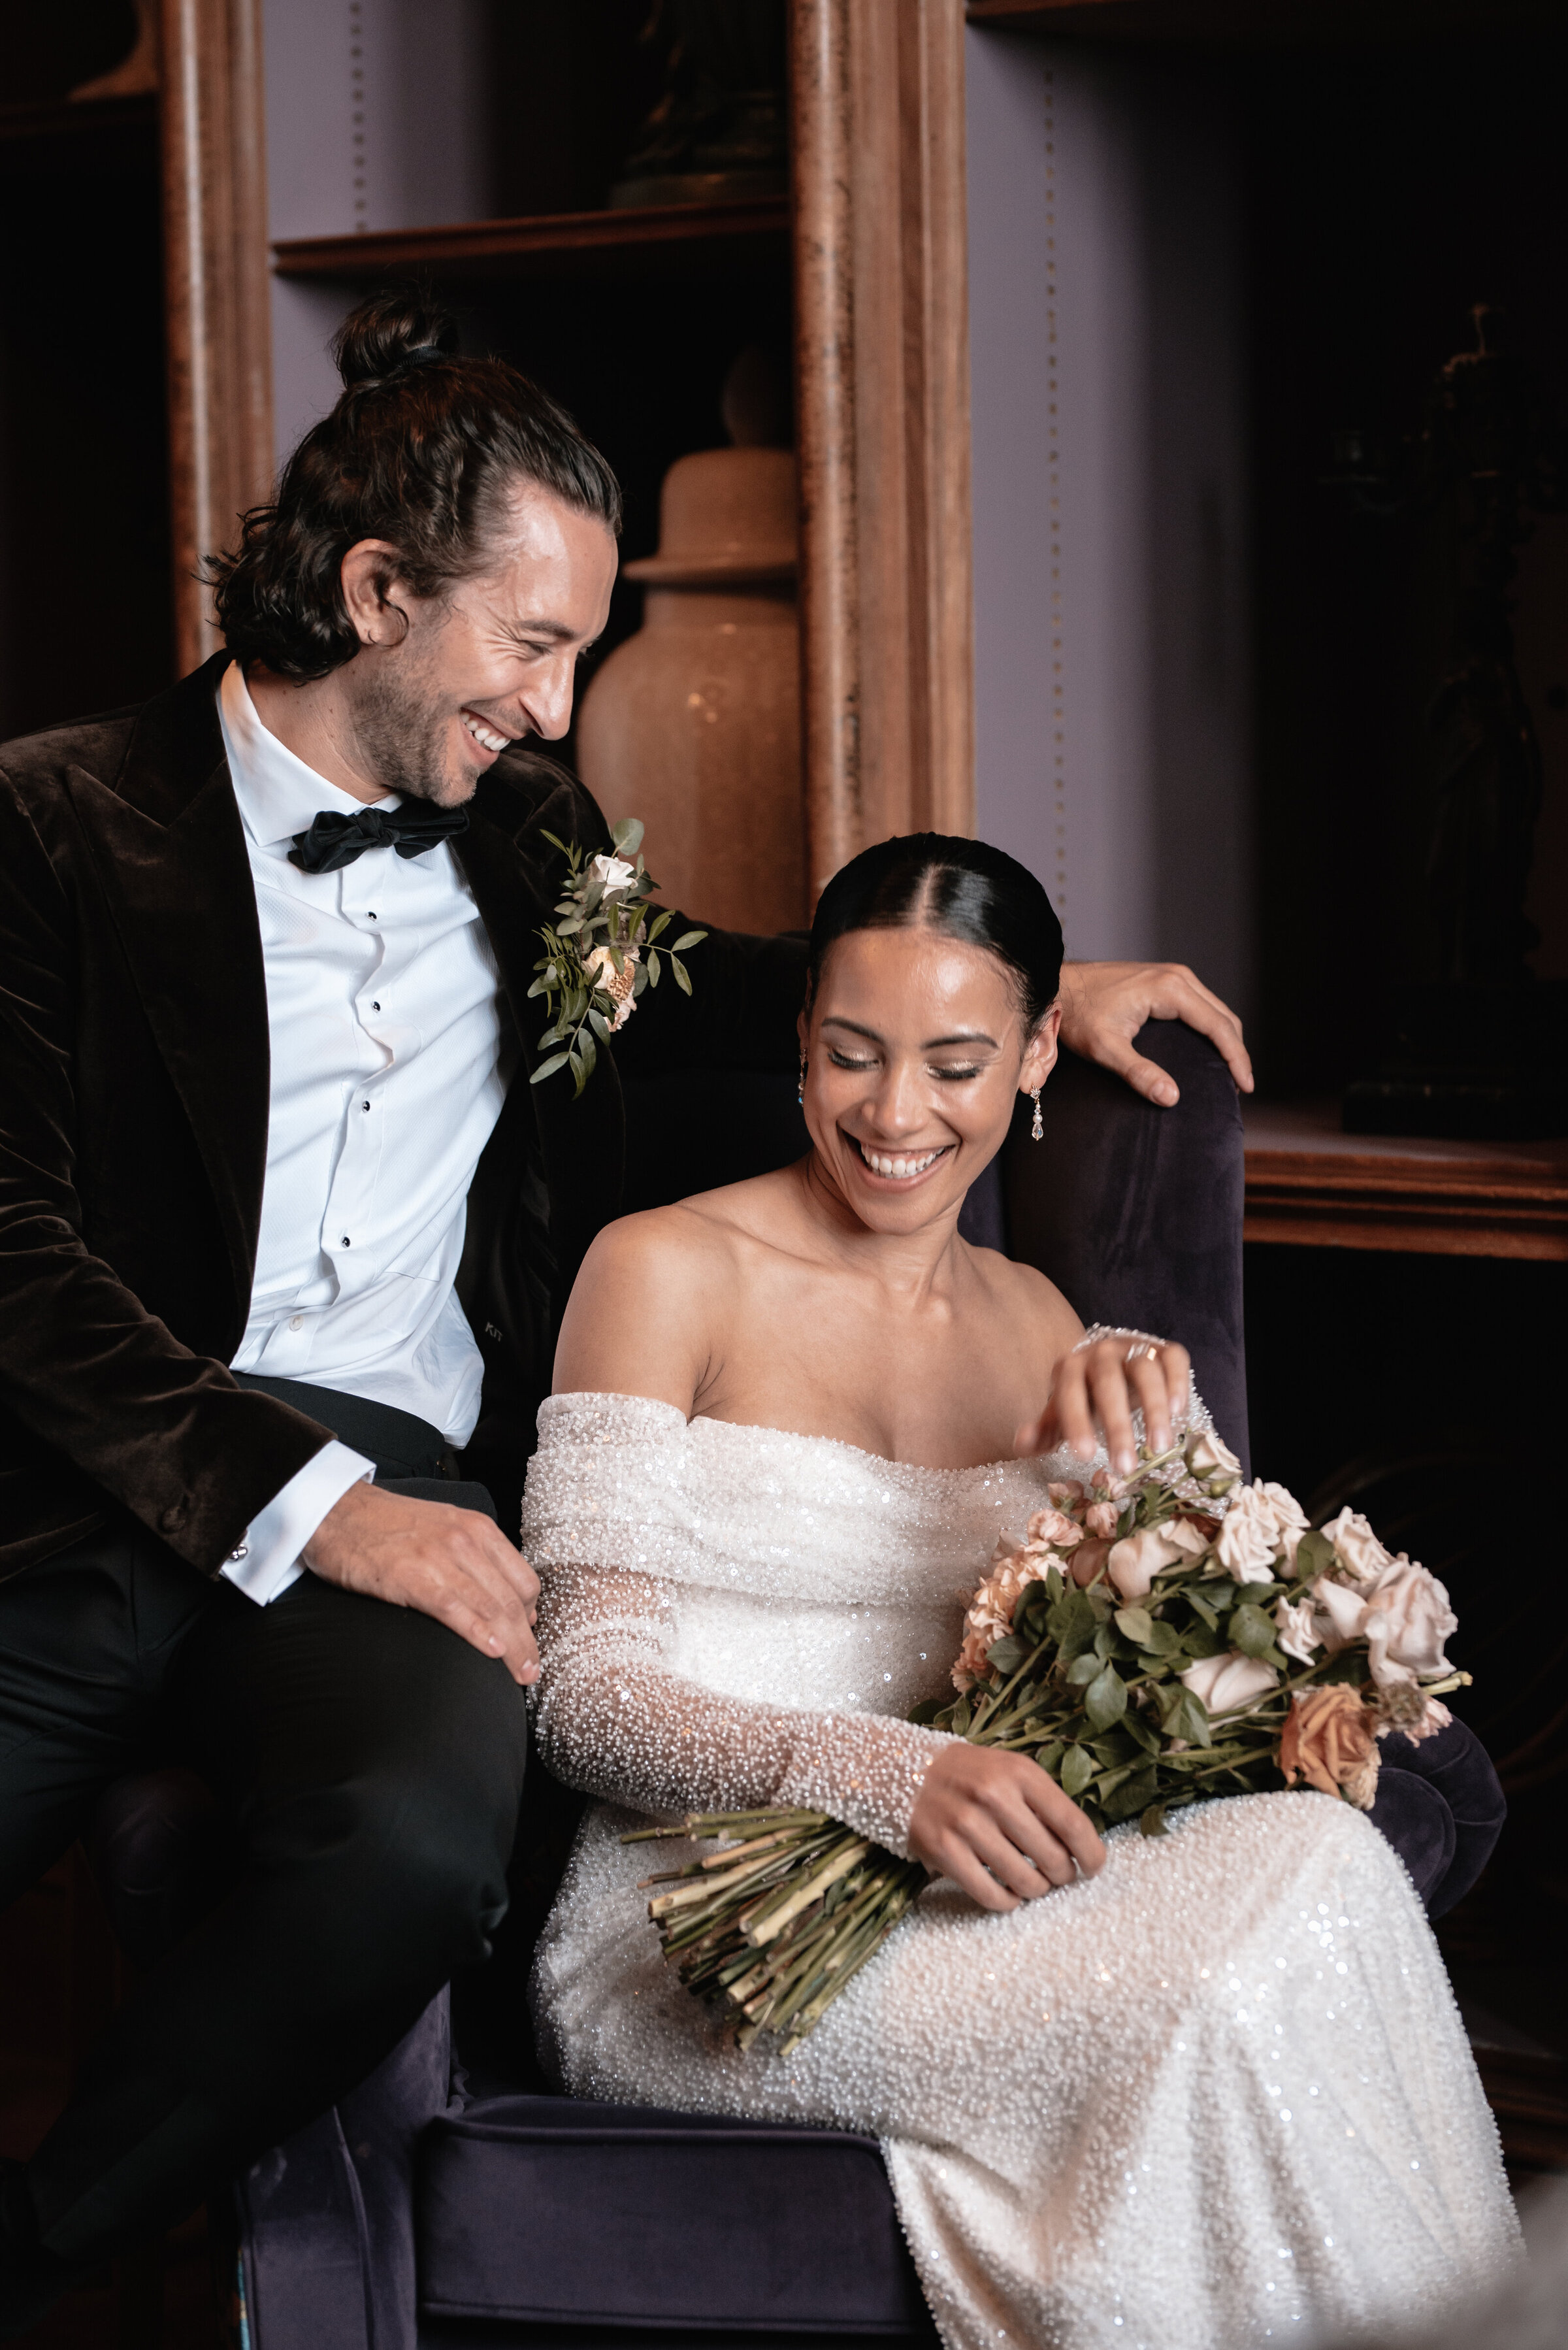 Bride and Groom seated together on chair exchanging a laugh